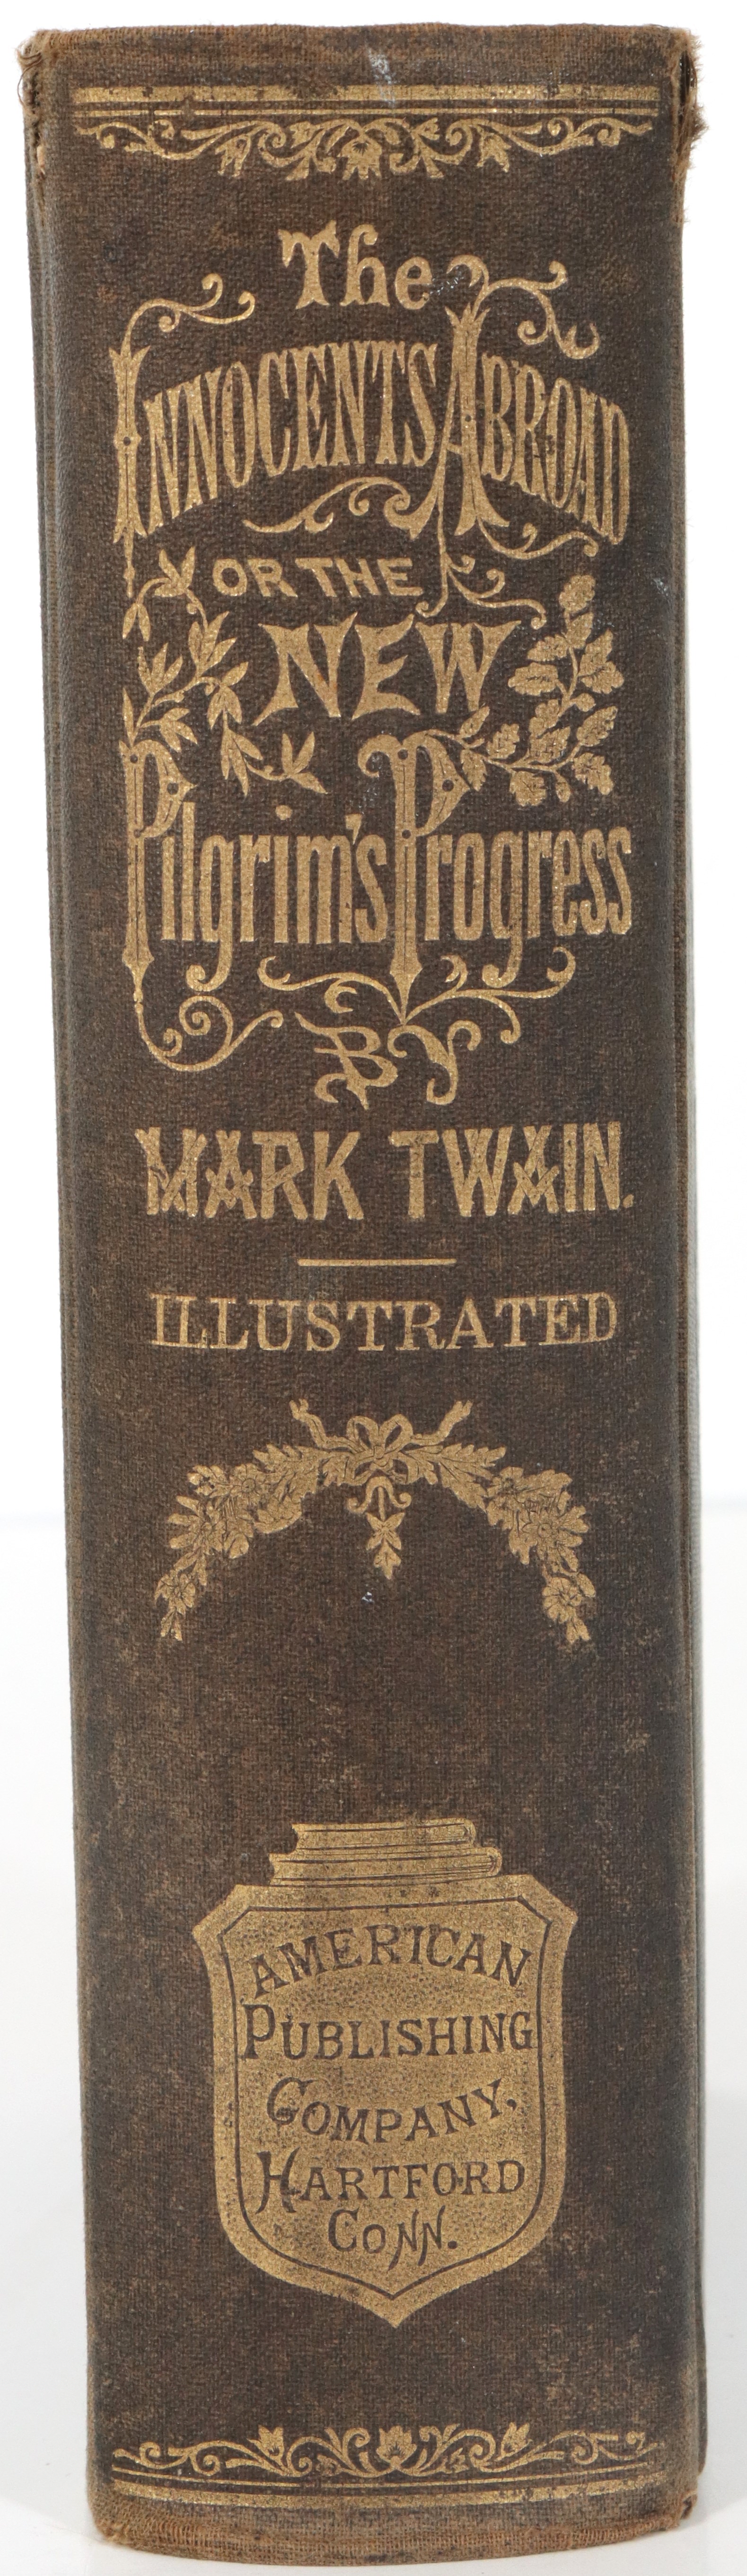 Mark Twain Book; The Innocents Abroad Or The New Pilgrim’s Progress - Image 4 of 13